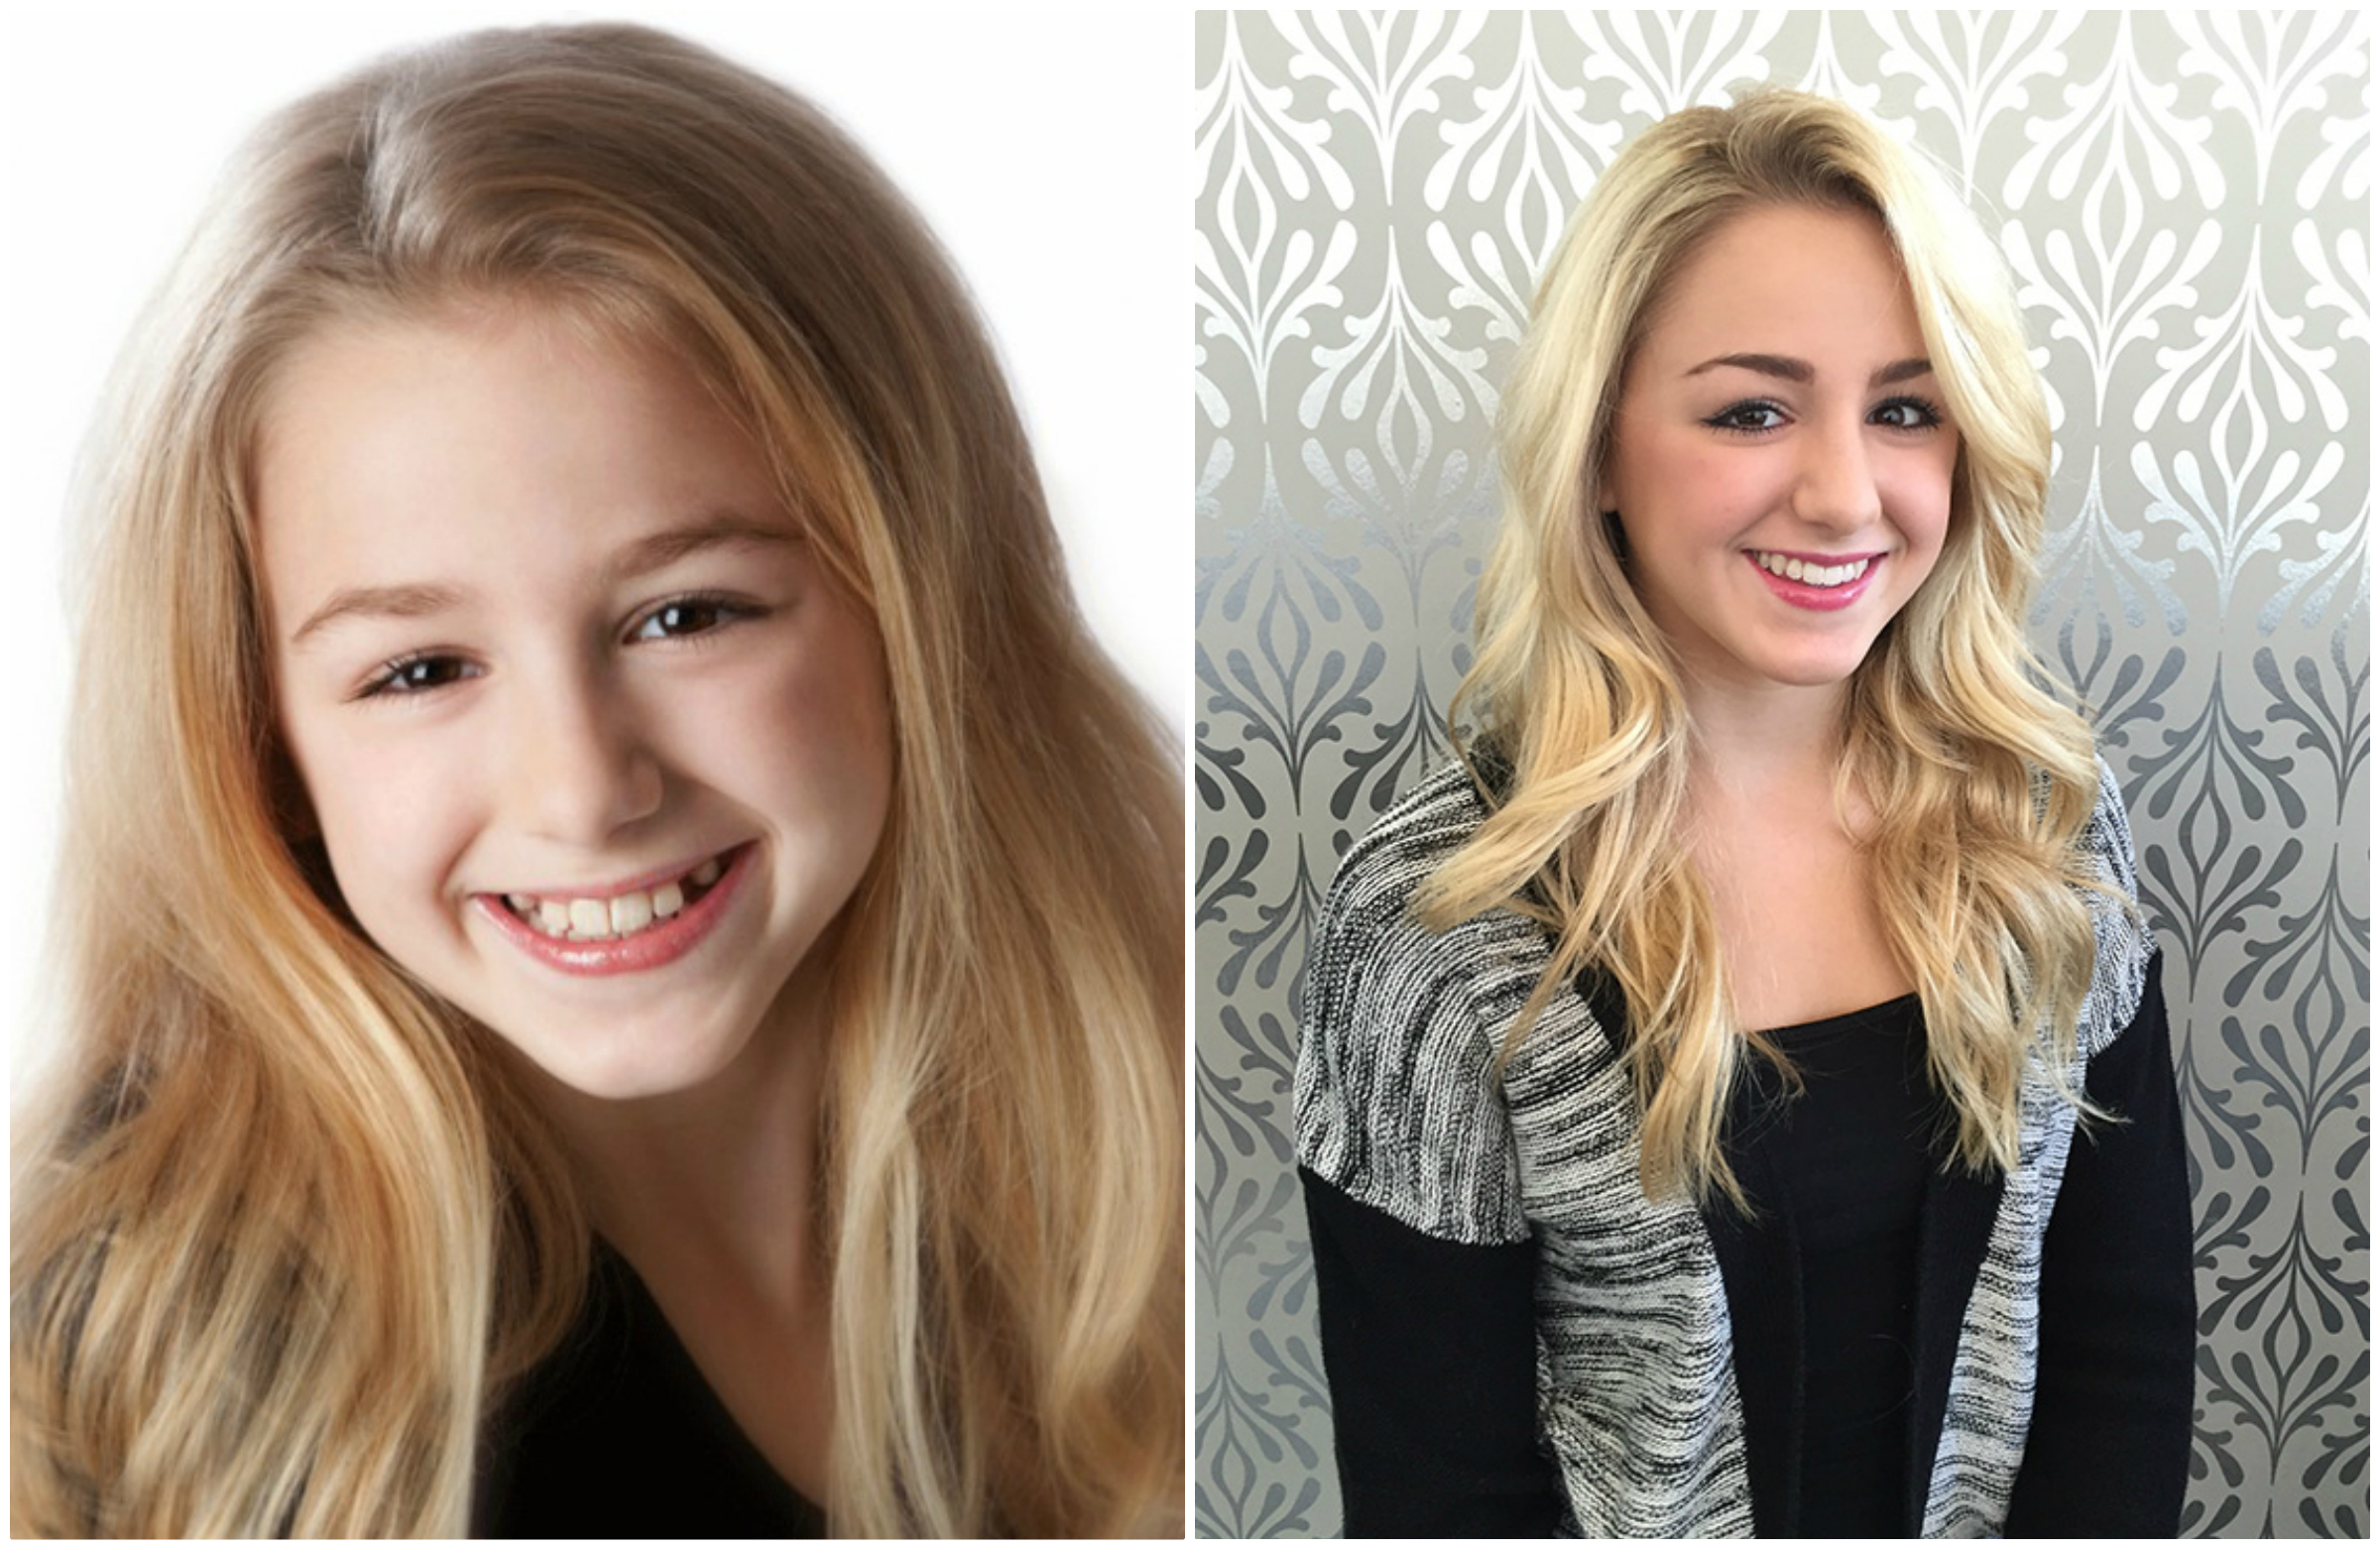 Chloe Lukasiak had developed the passion for dancing from a very young age....